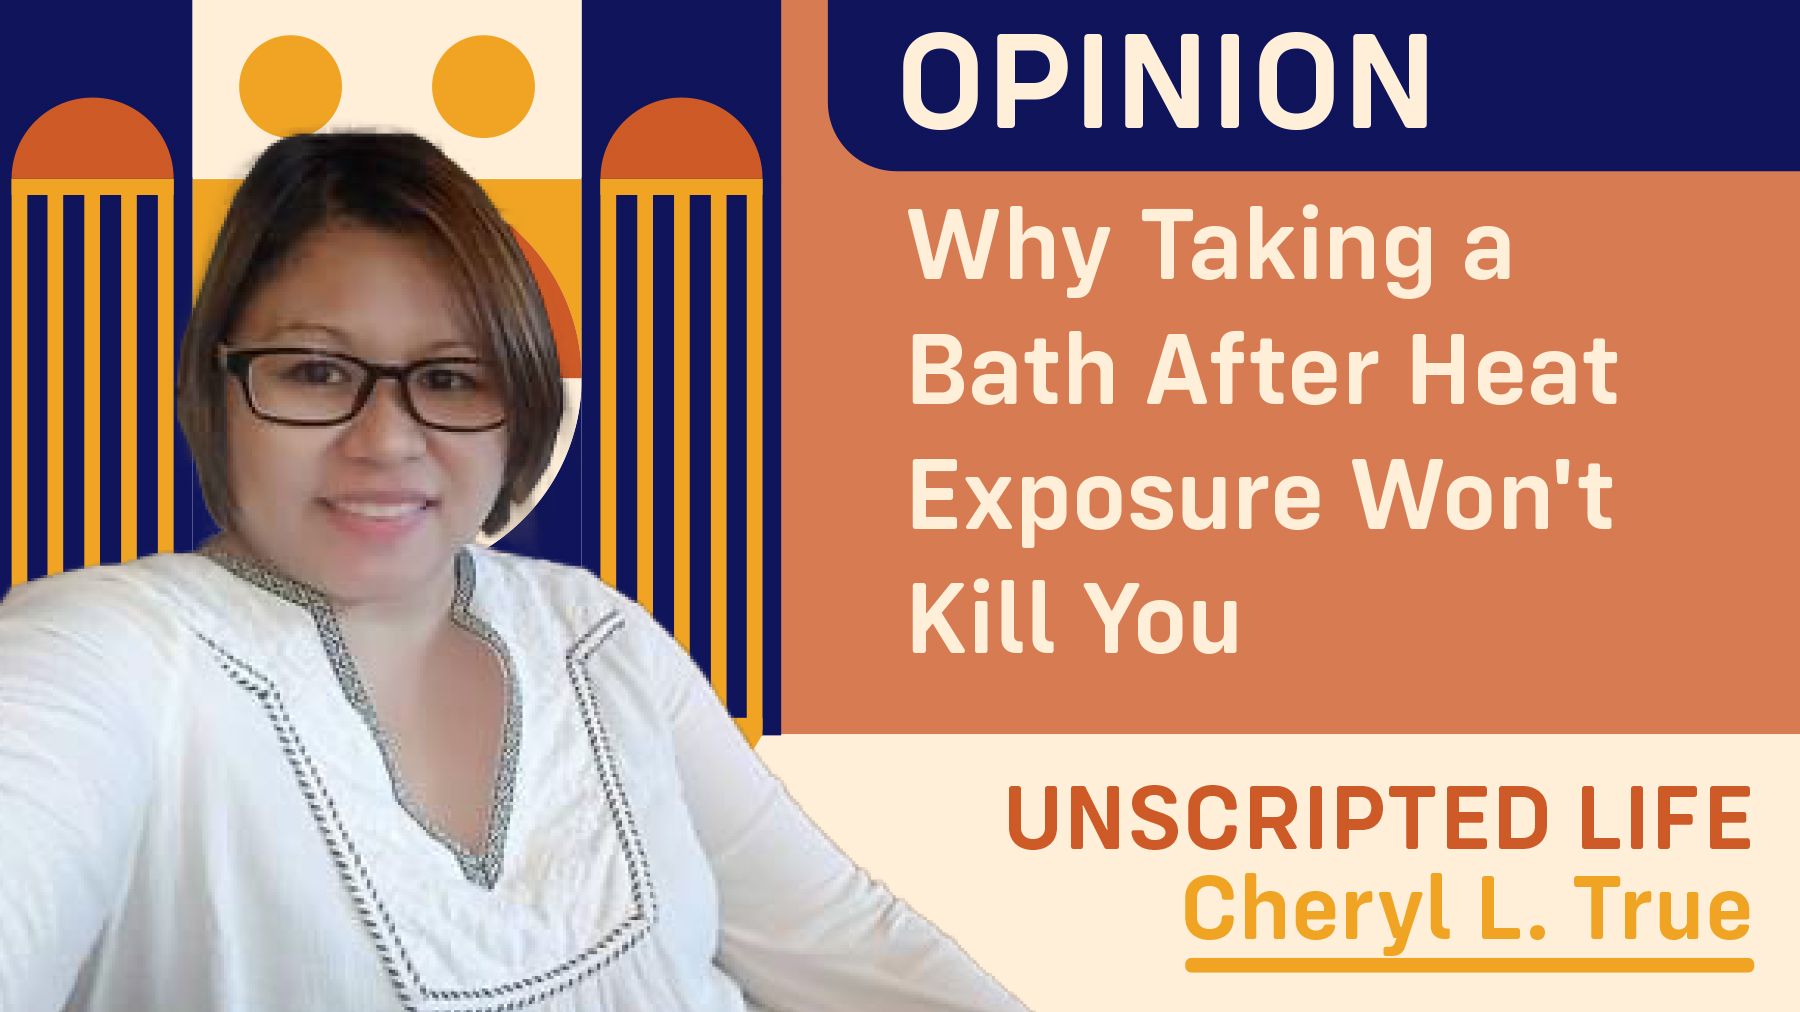 Why Taking a Bath After Heat Exposure Won't Kill You